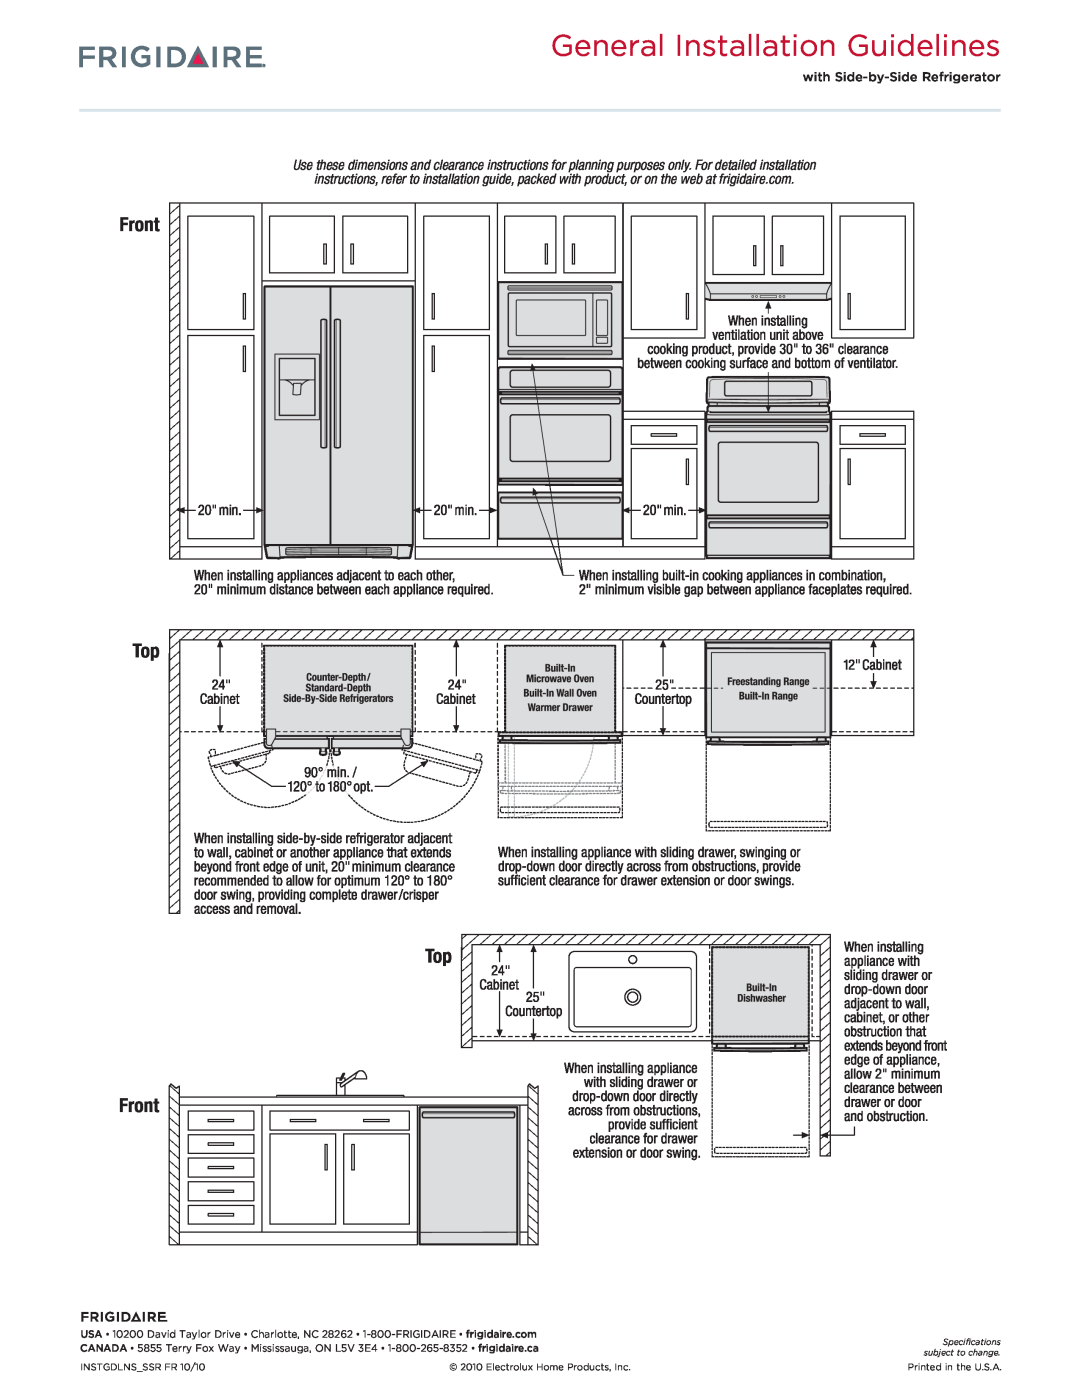 Frigidaire PL36WC41EC installation instructions General Installation Guidelines, Top Front 